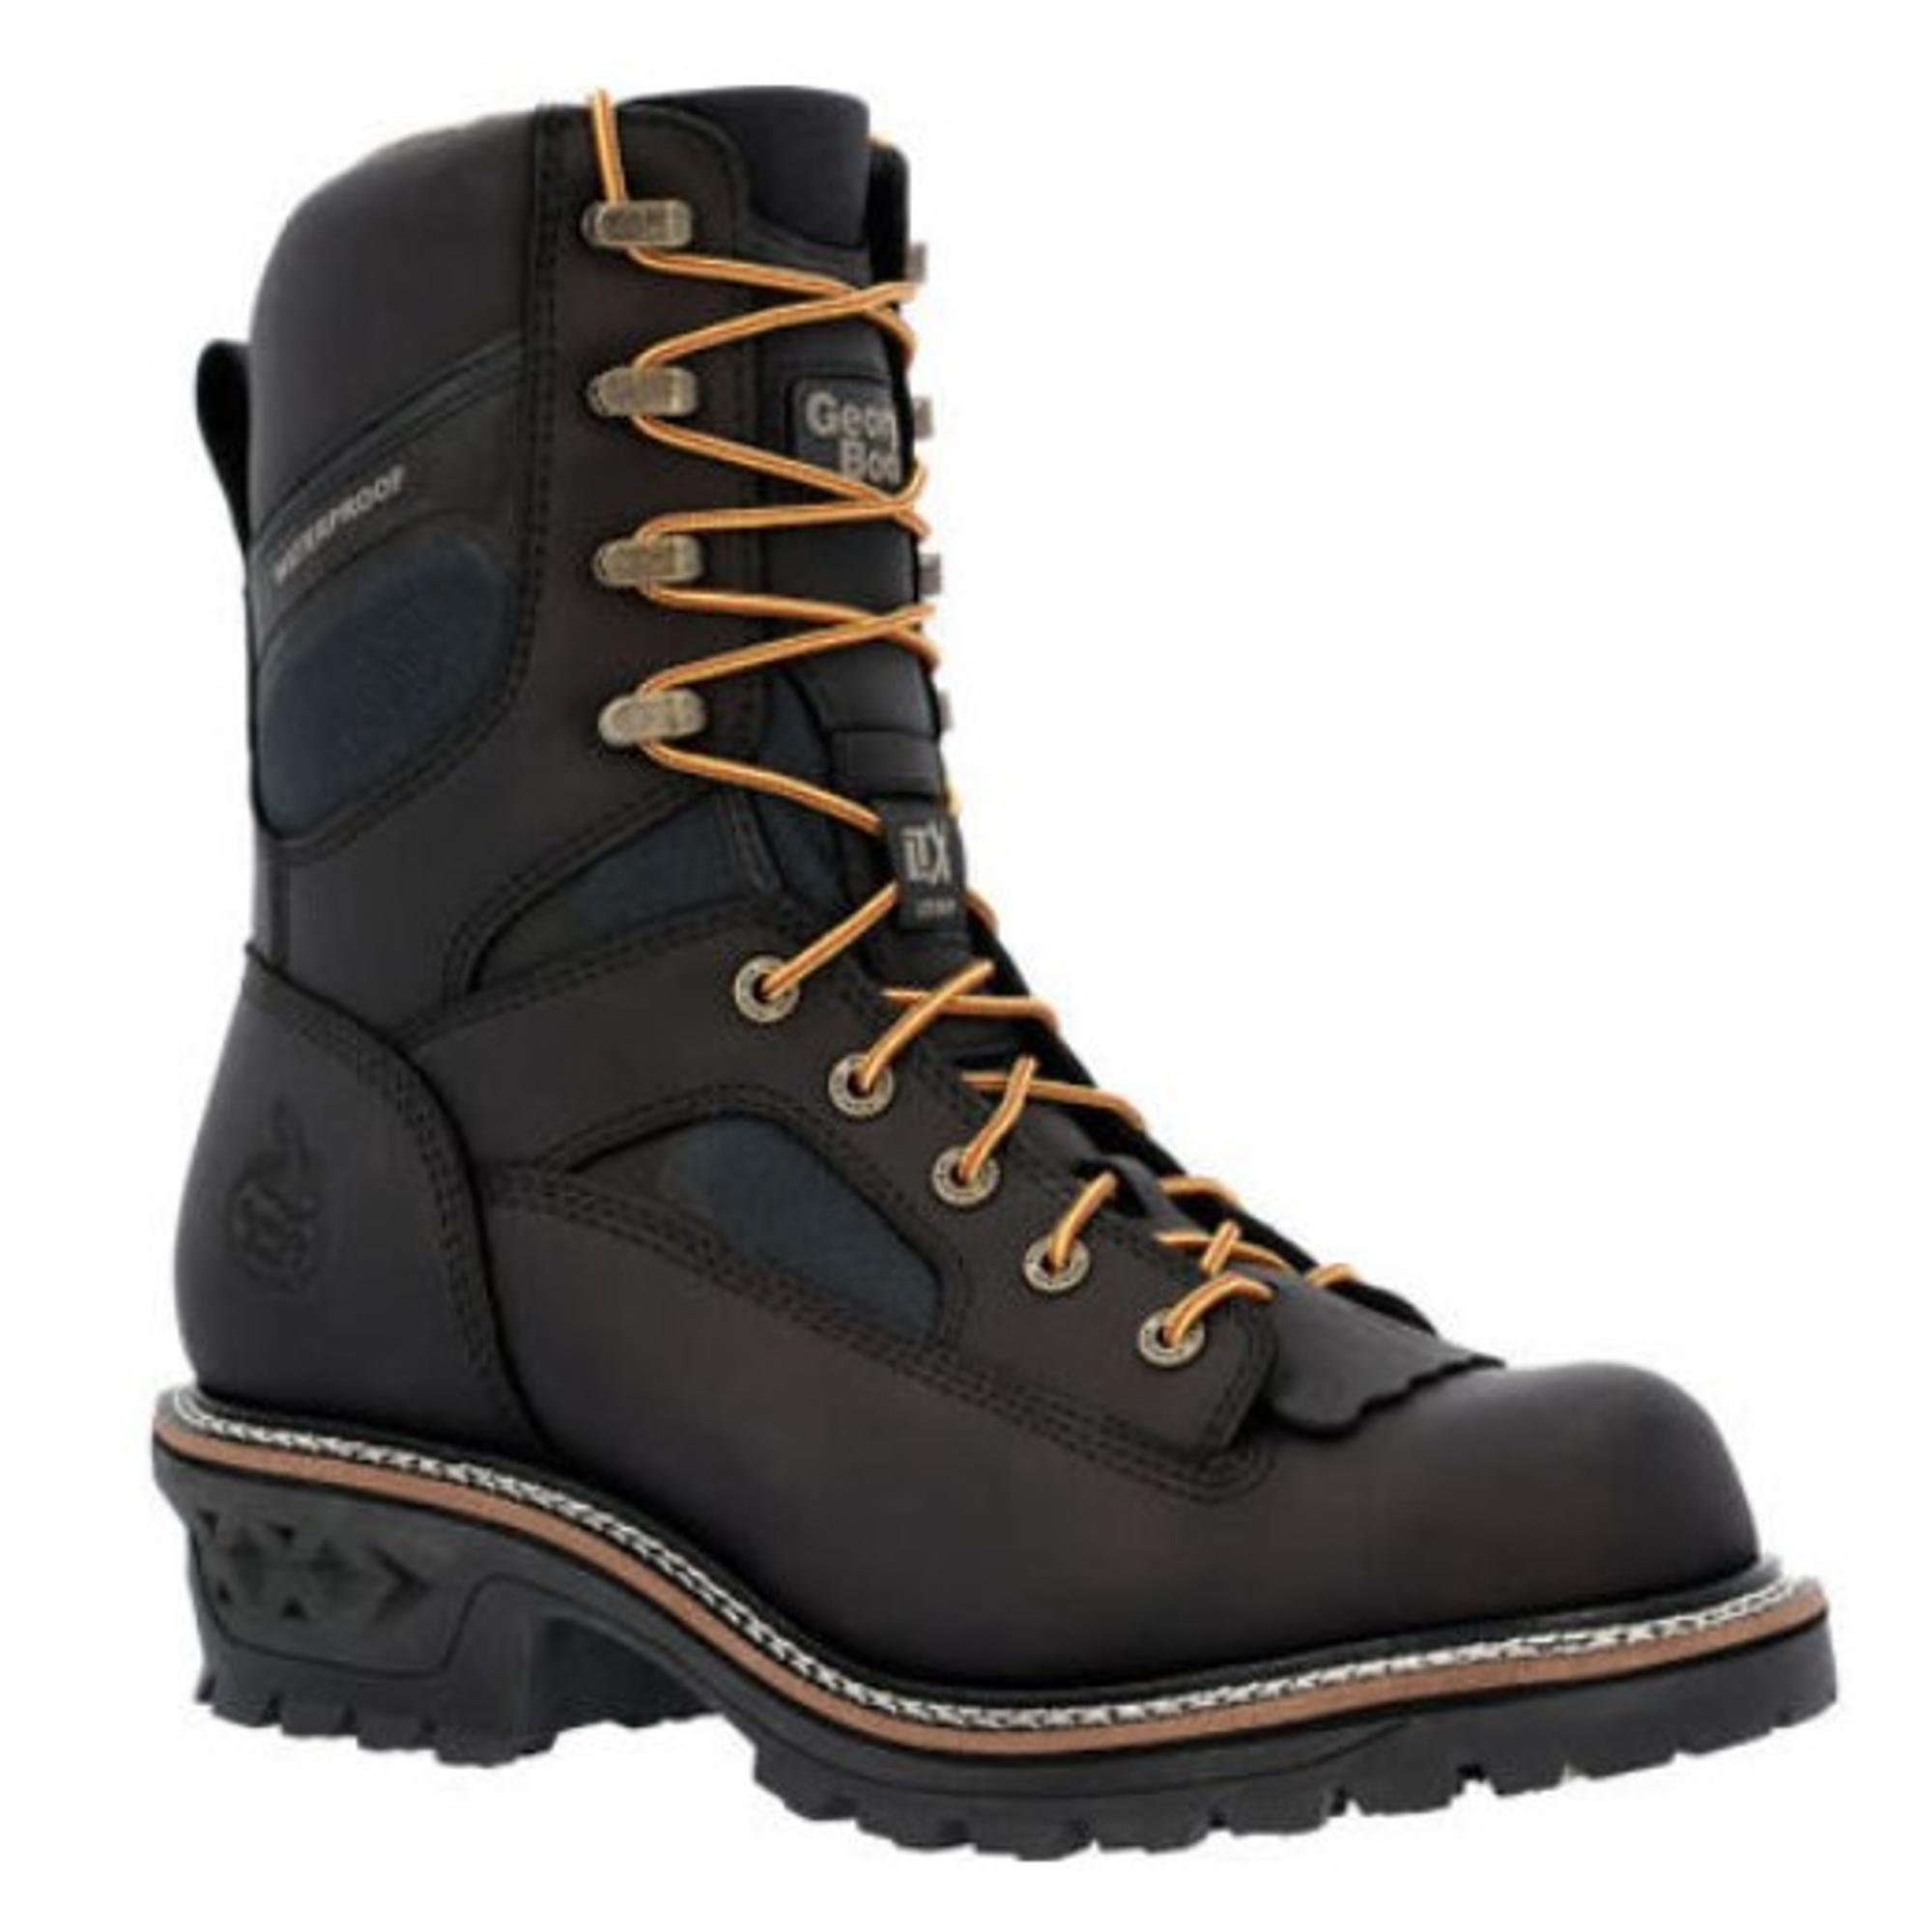 Ltx Logger Waterproof Lace Up Work Boots